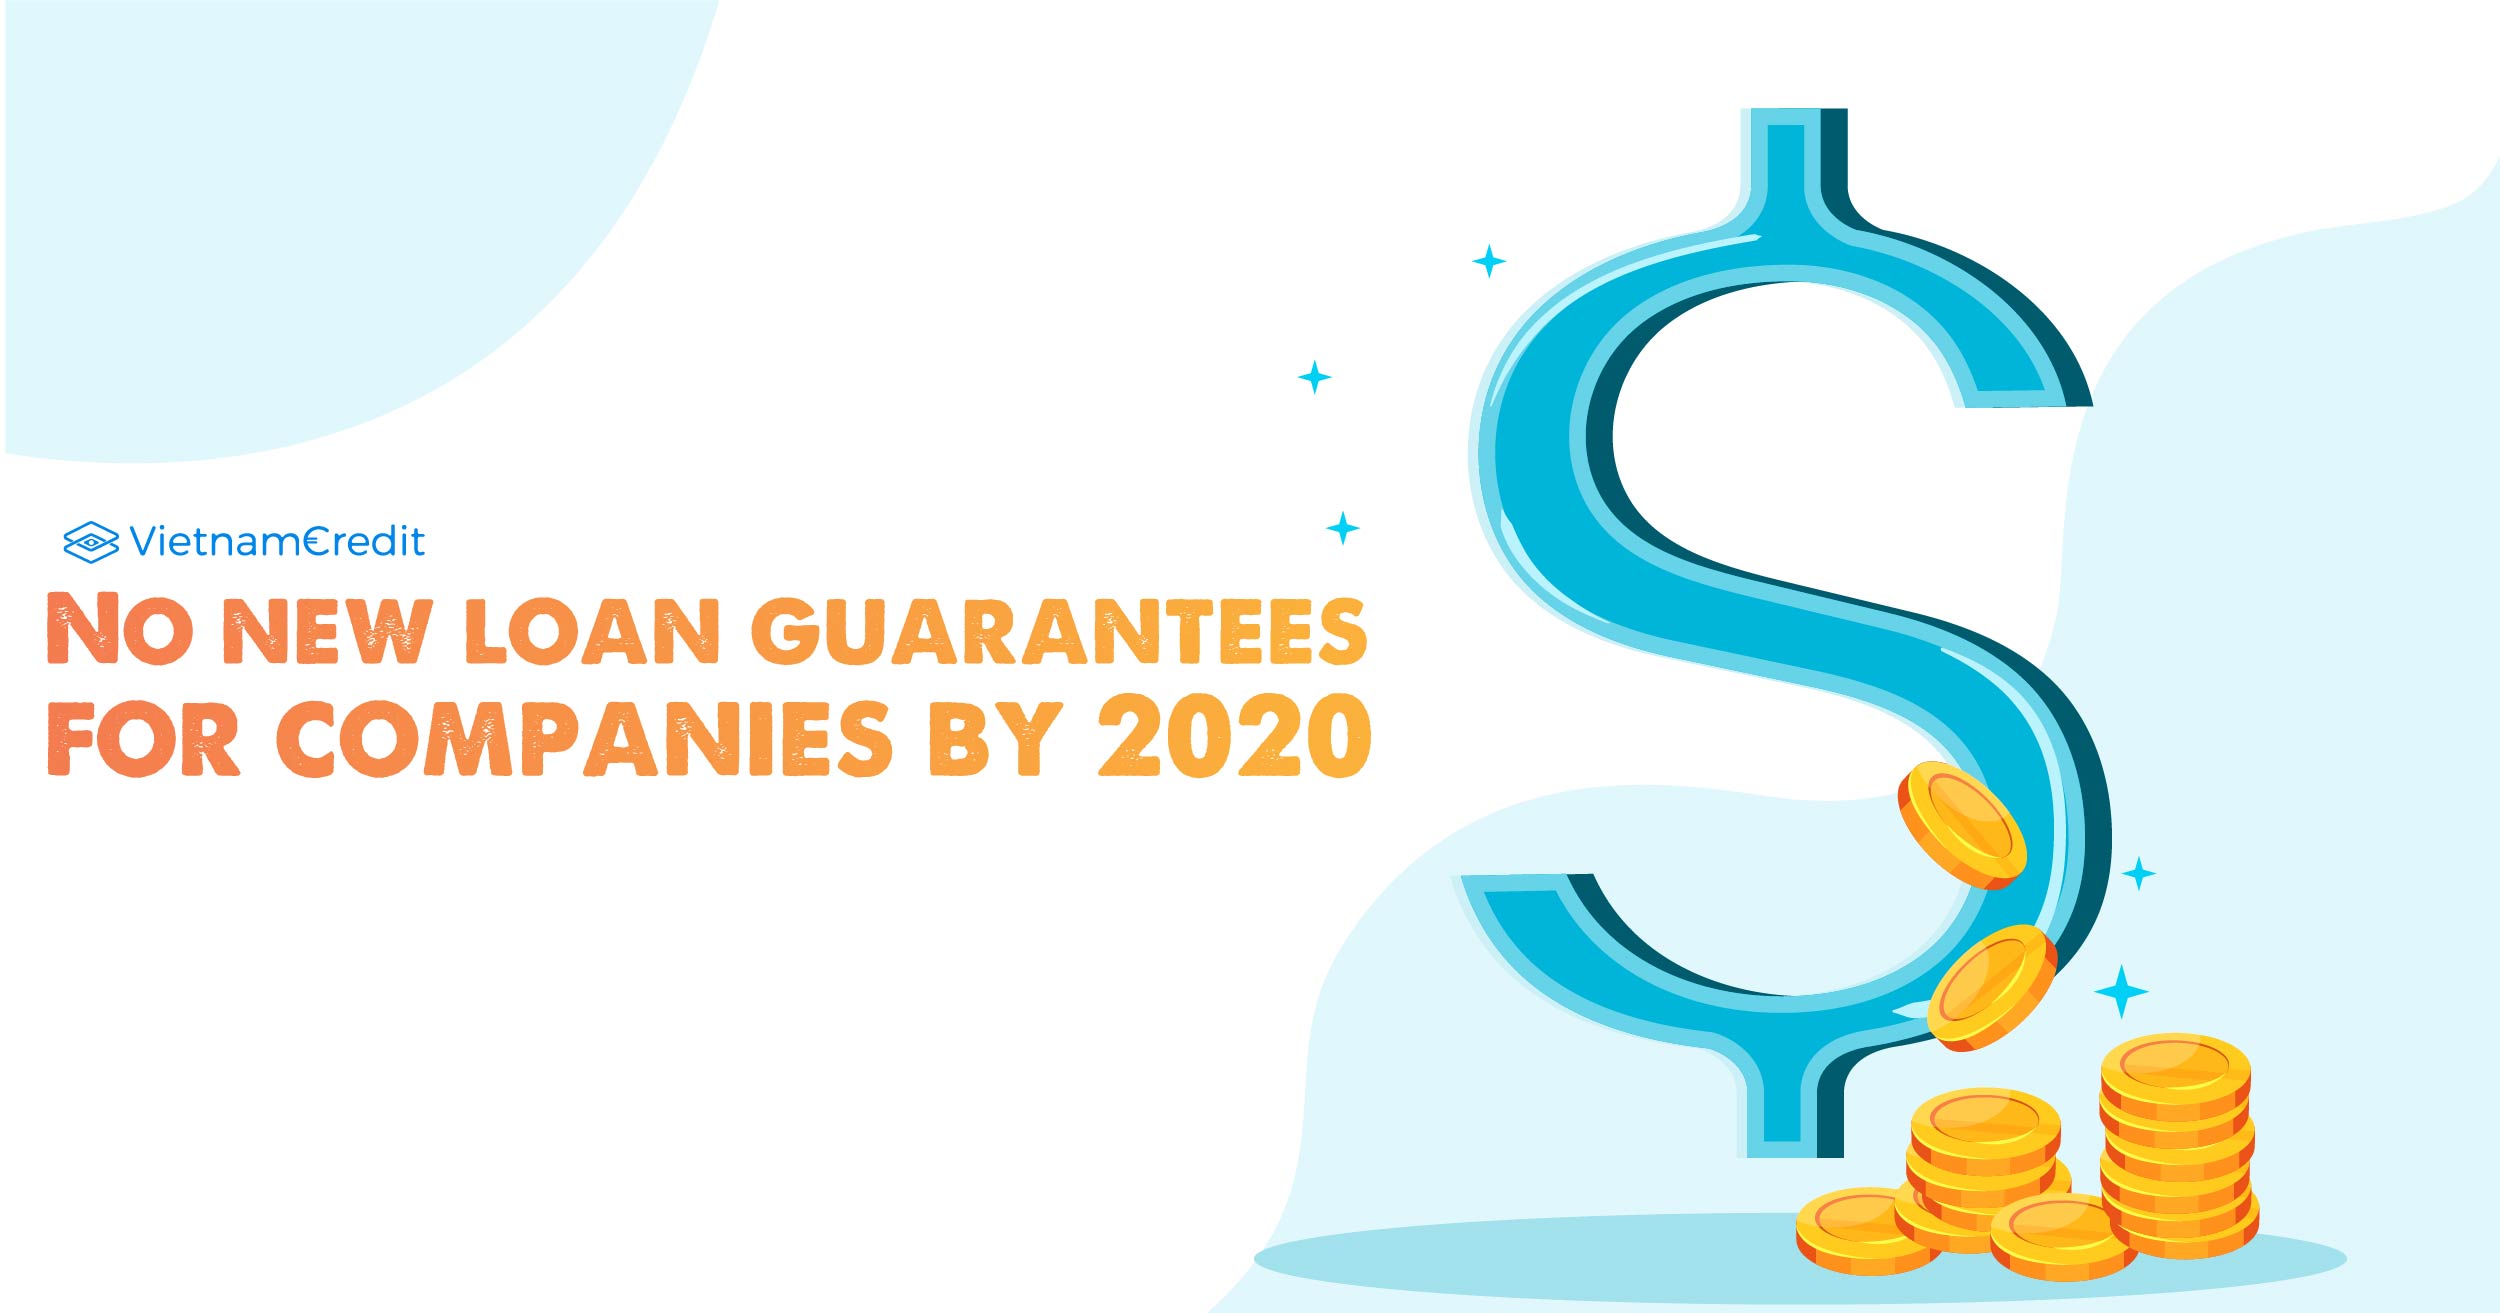 No new loan guarantees for companies by 2020